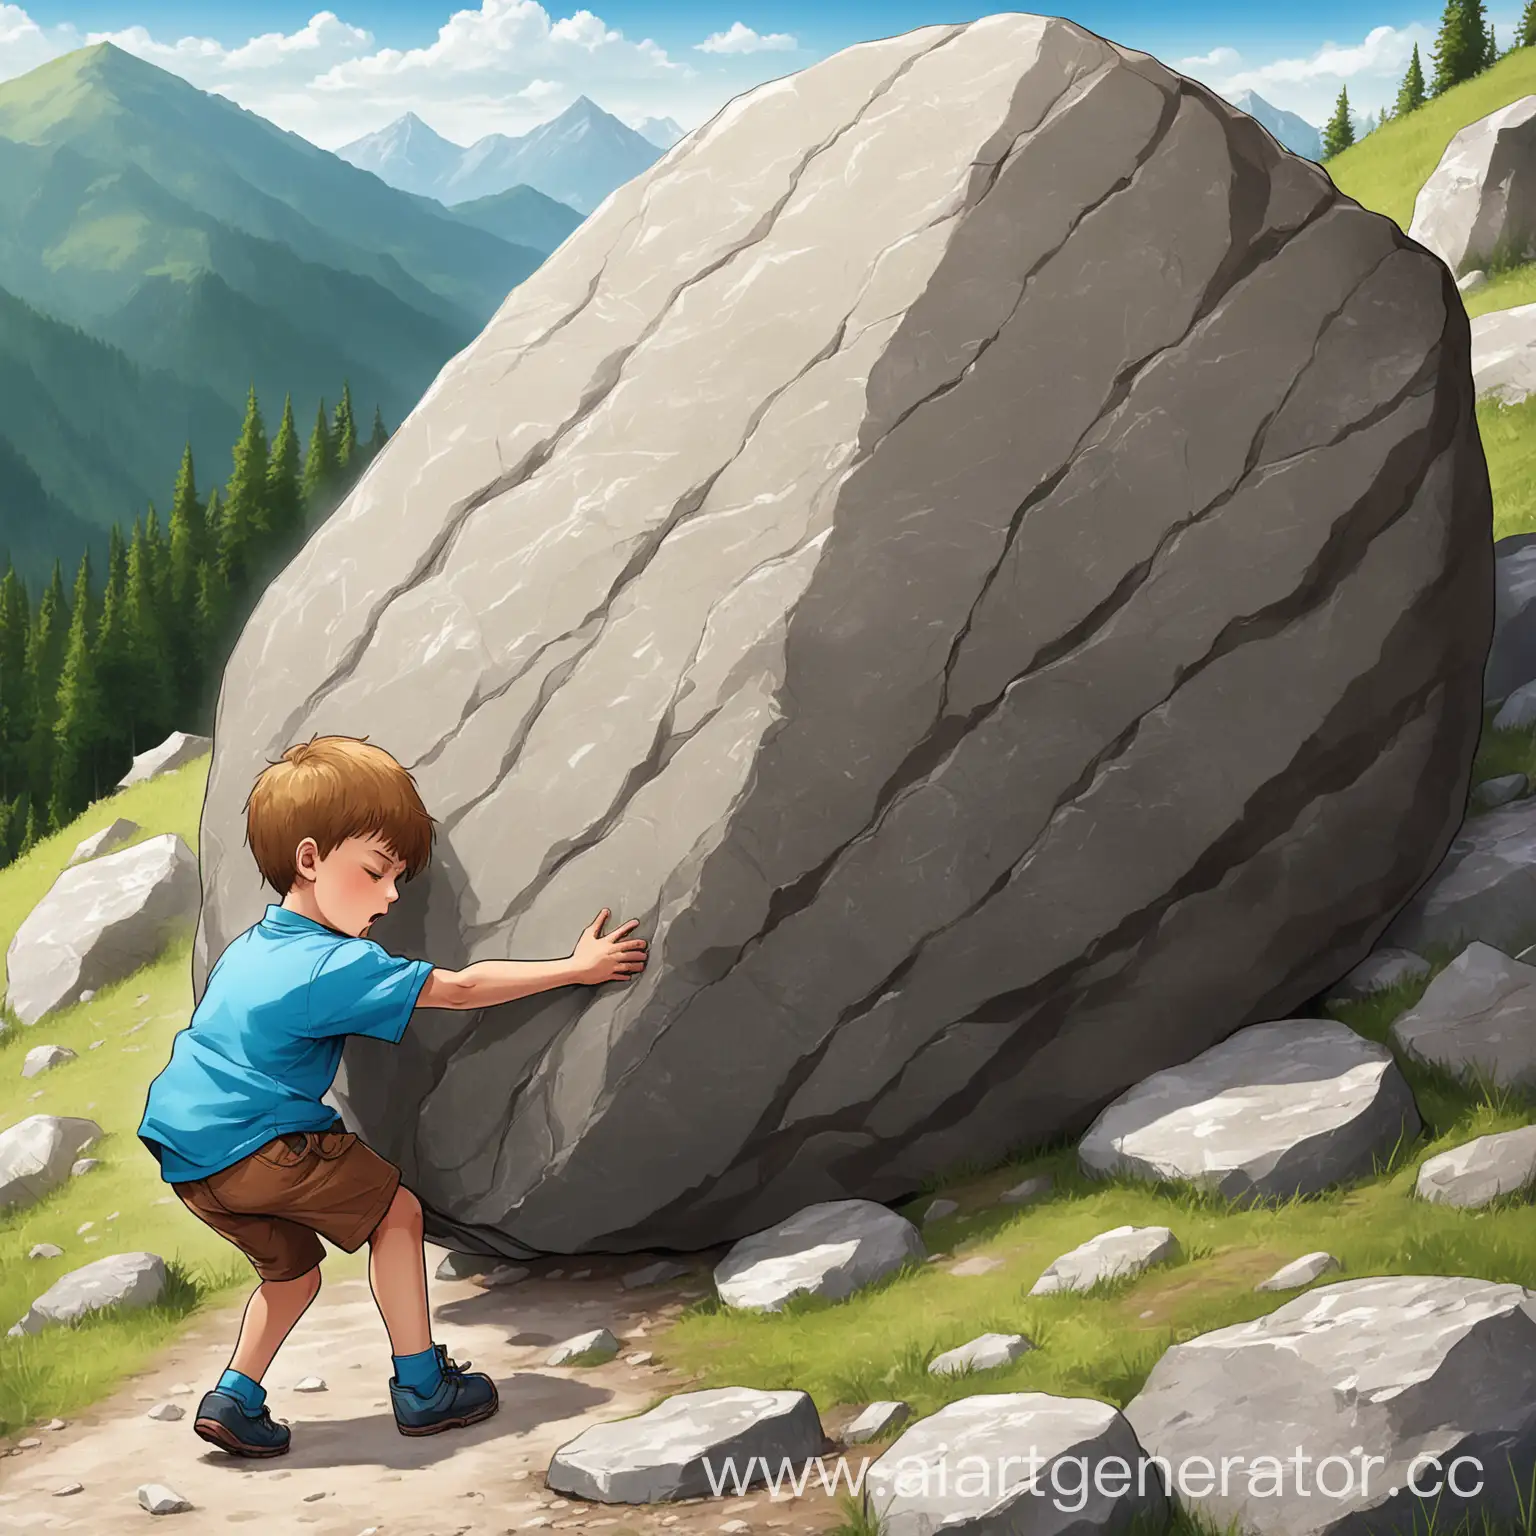 Boy-Exhausted-While-Moving-Large-Mountain-Stone